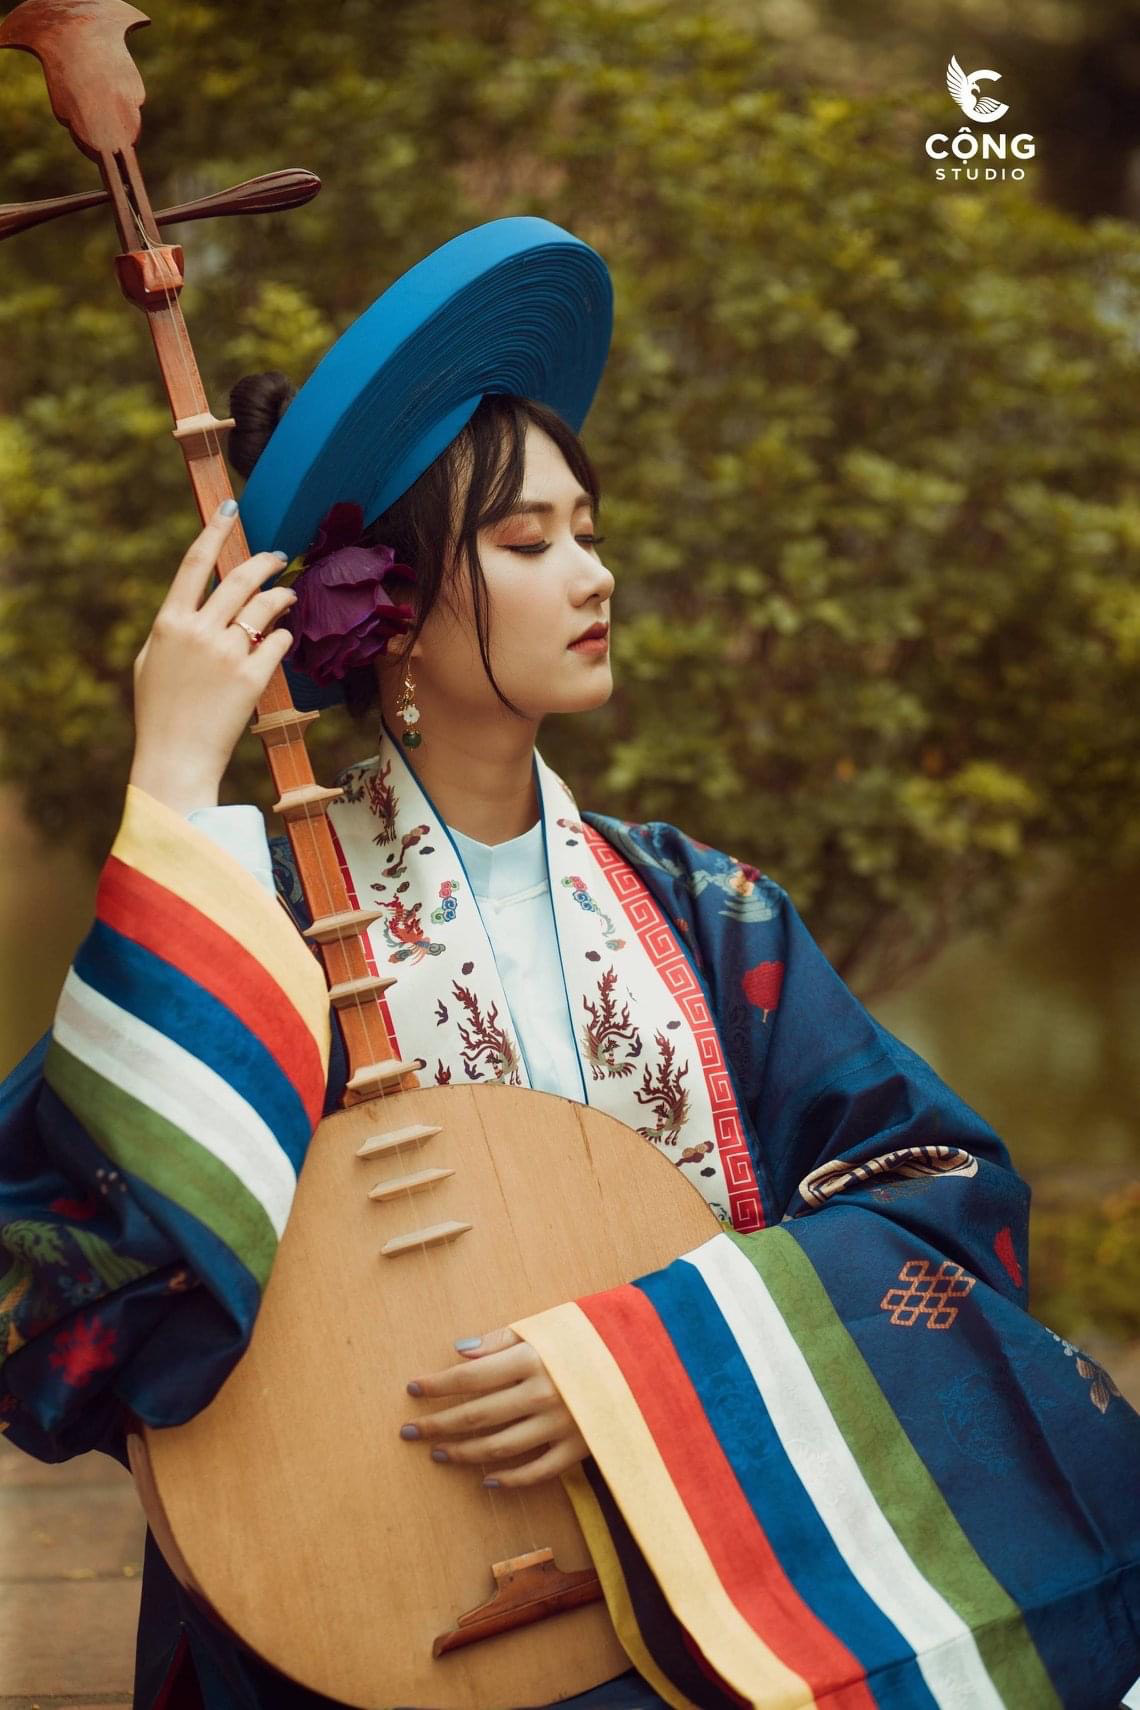 A female student wears a ‘nhật bình’ dress and holds a ‘đàn kìm,’ a traditional Vietnamese double-stringed lute, in this supplied yearbook photo.